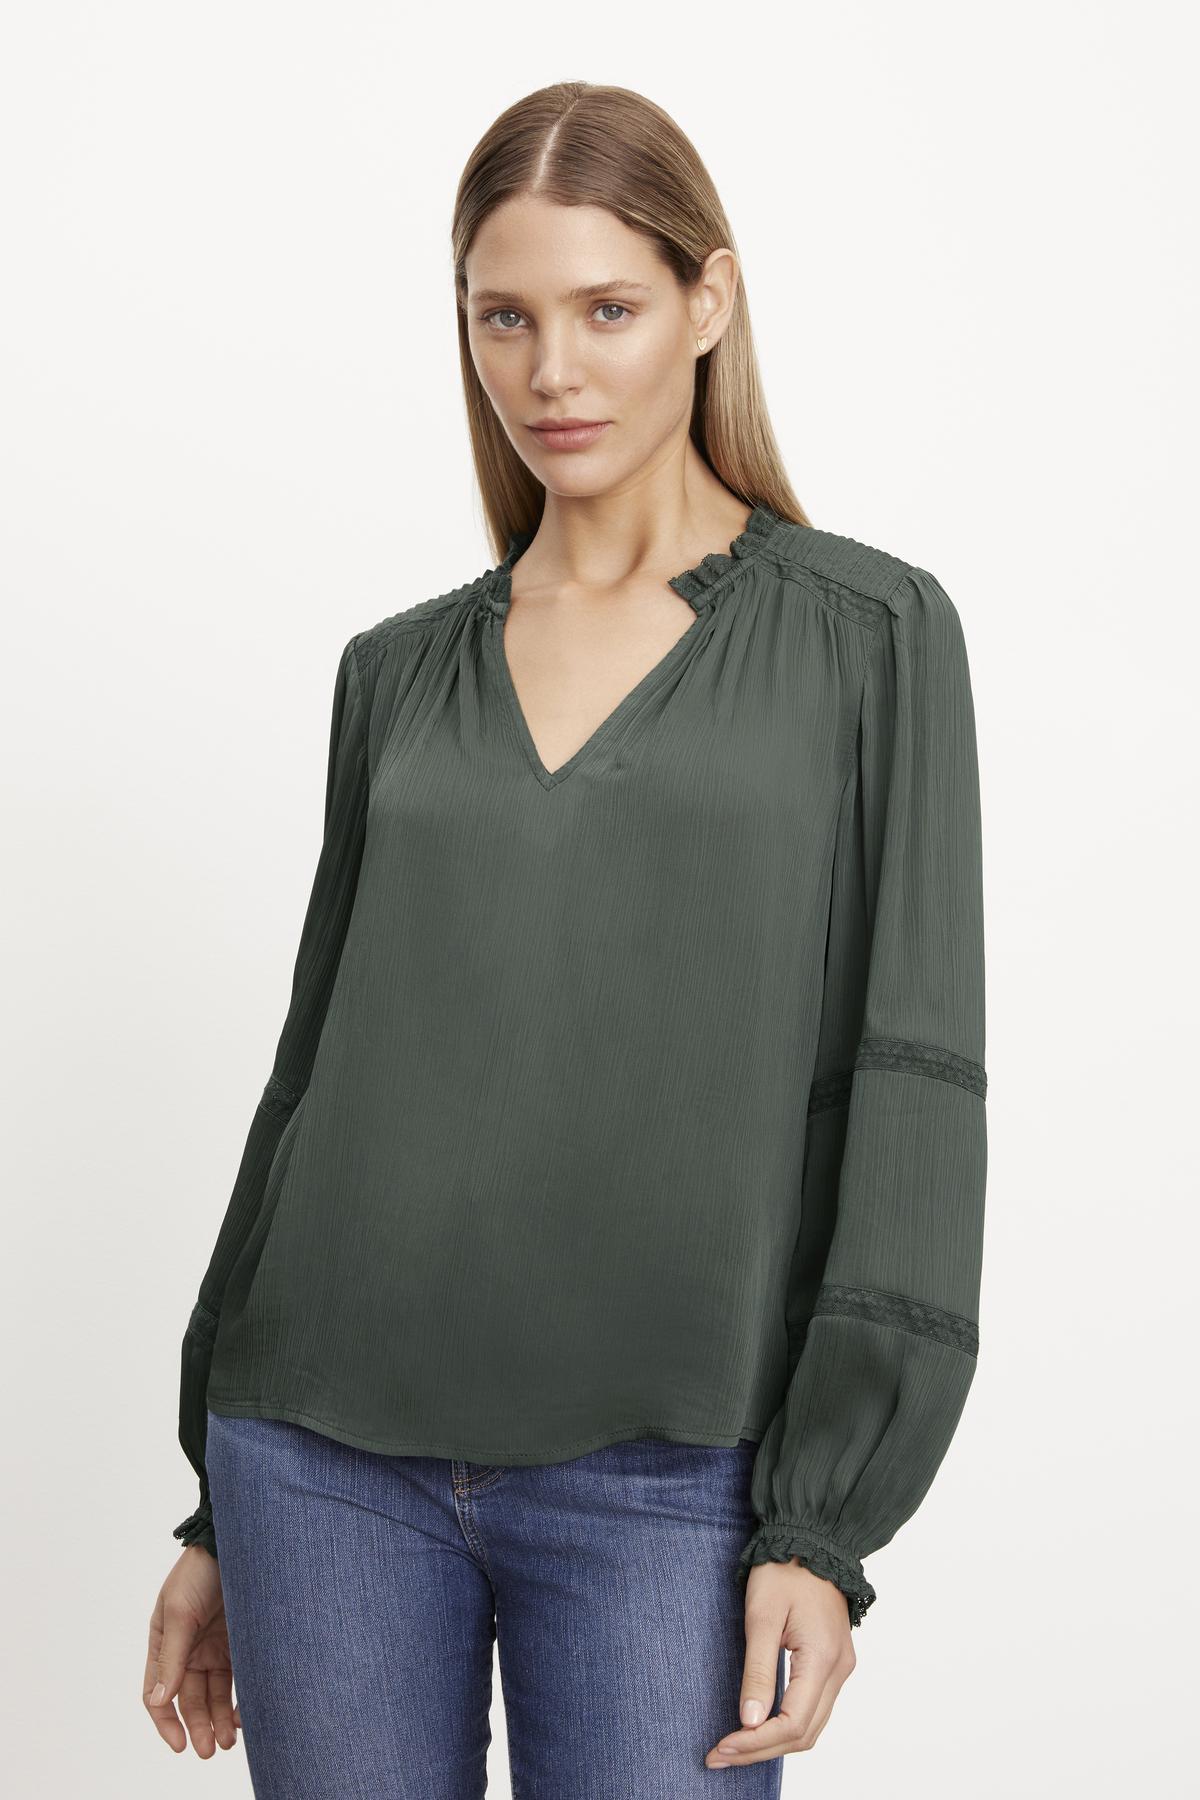   The model is wearing a green lace Velvet by Graham & Spencer blouse with long sleeves. 